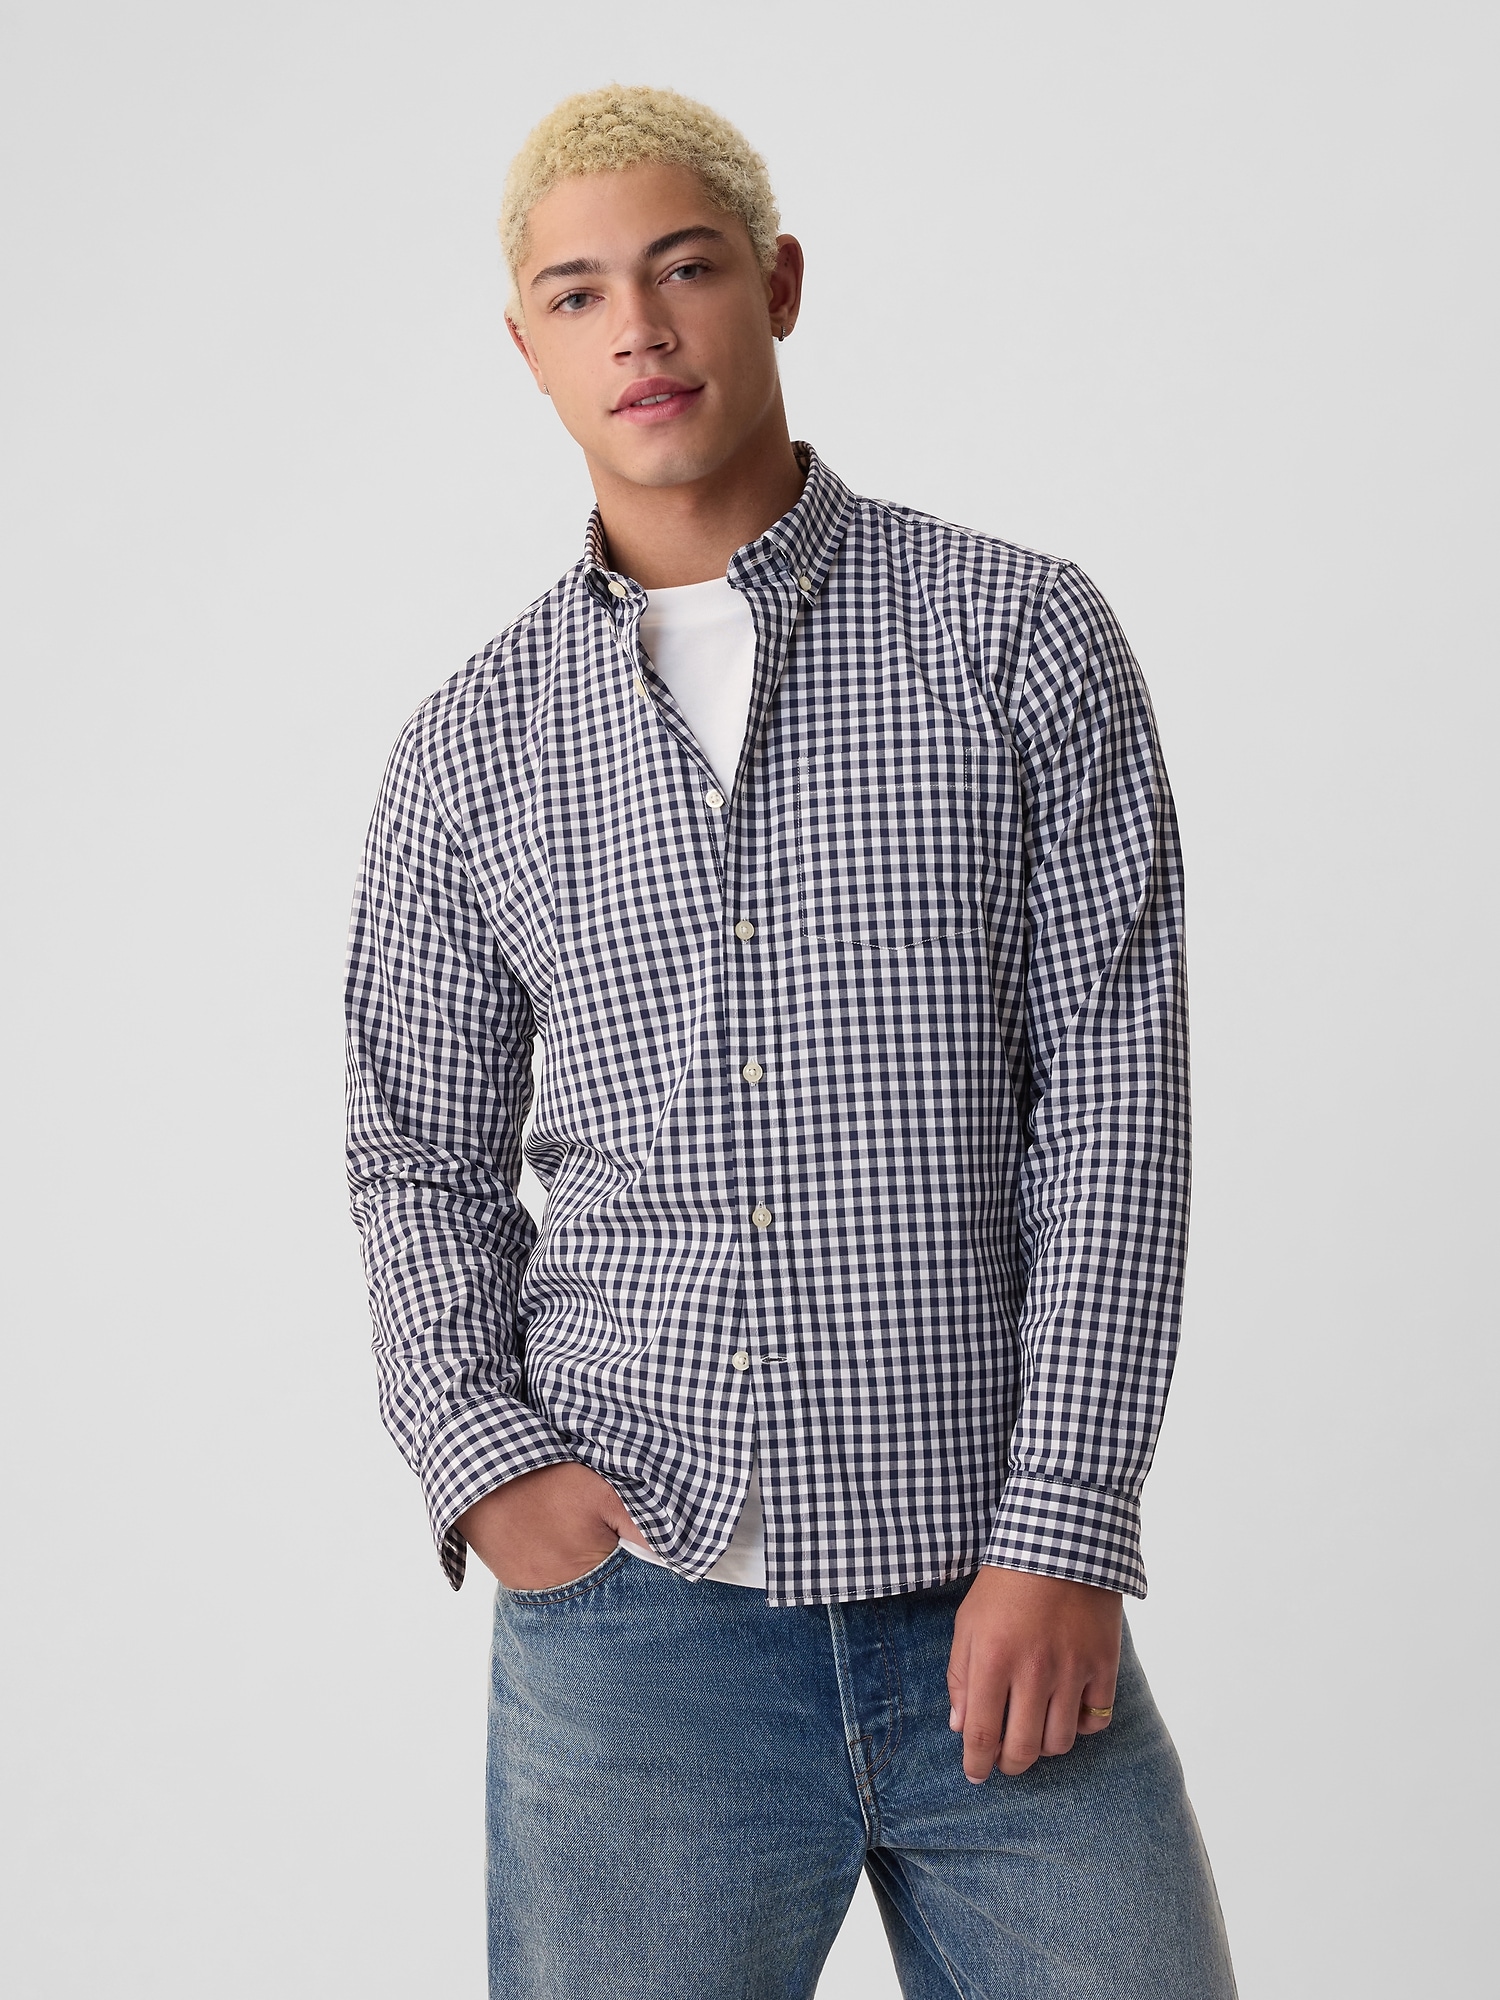 All-Day Poplin Shirt in Untucked Fit